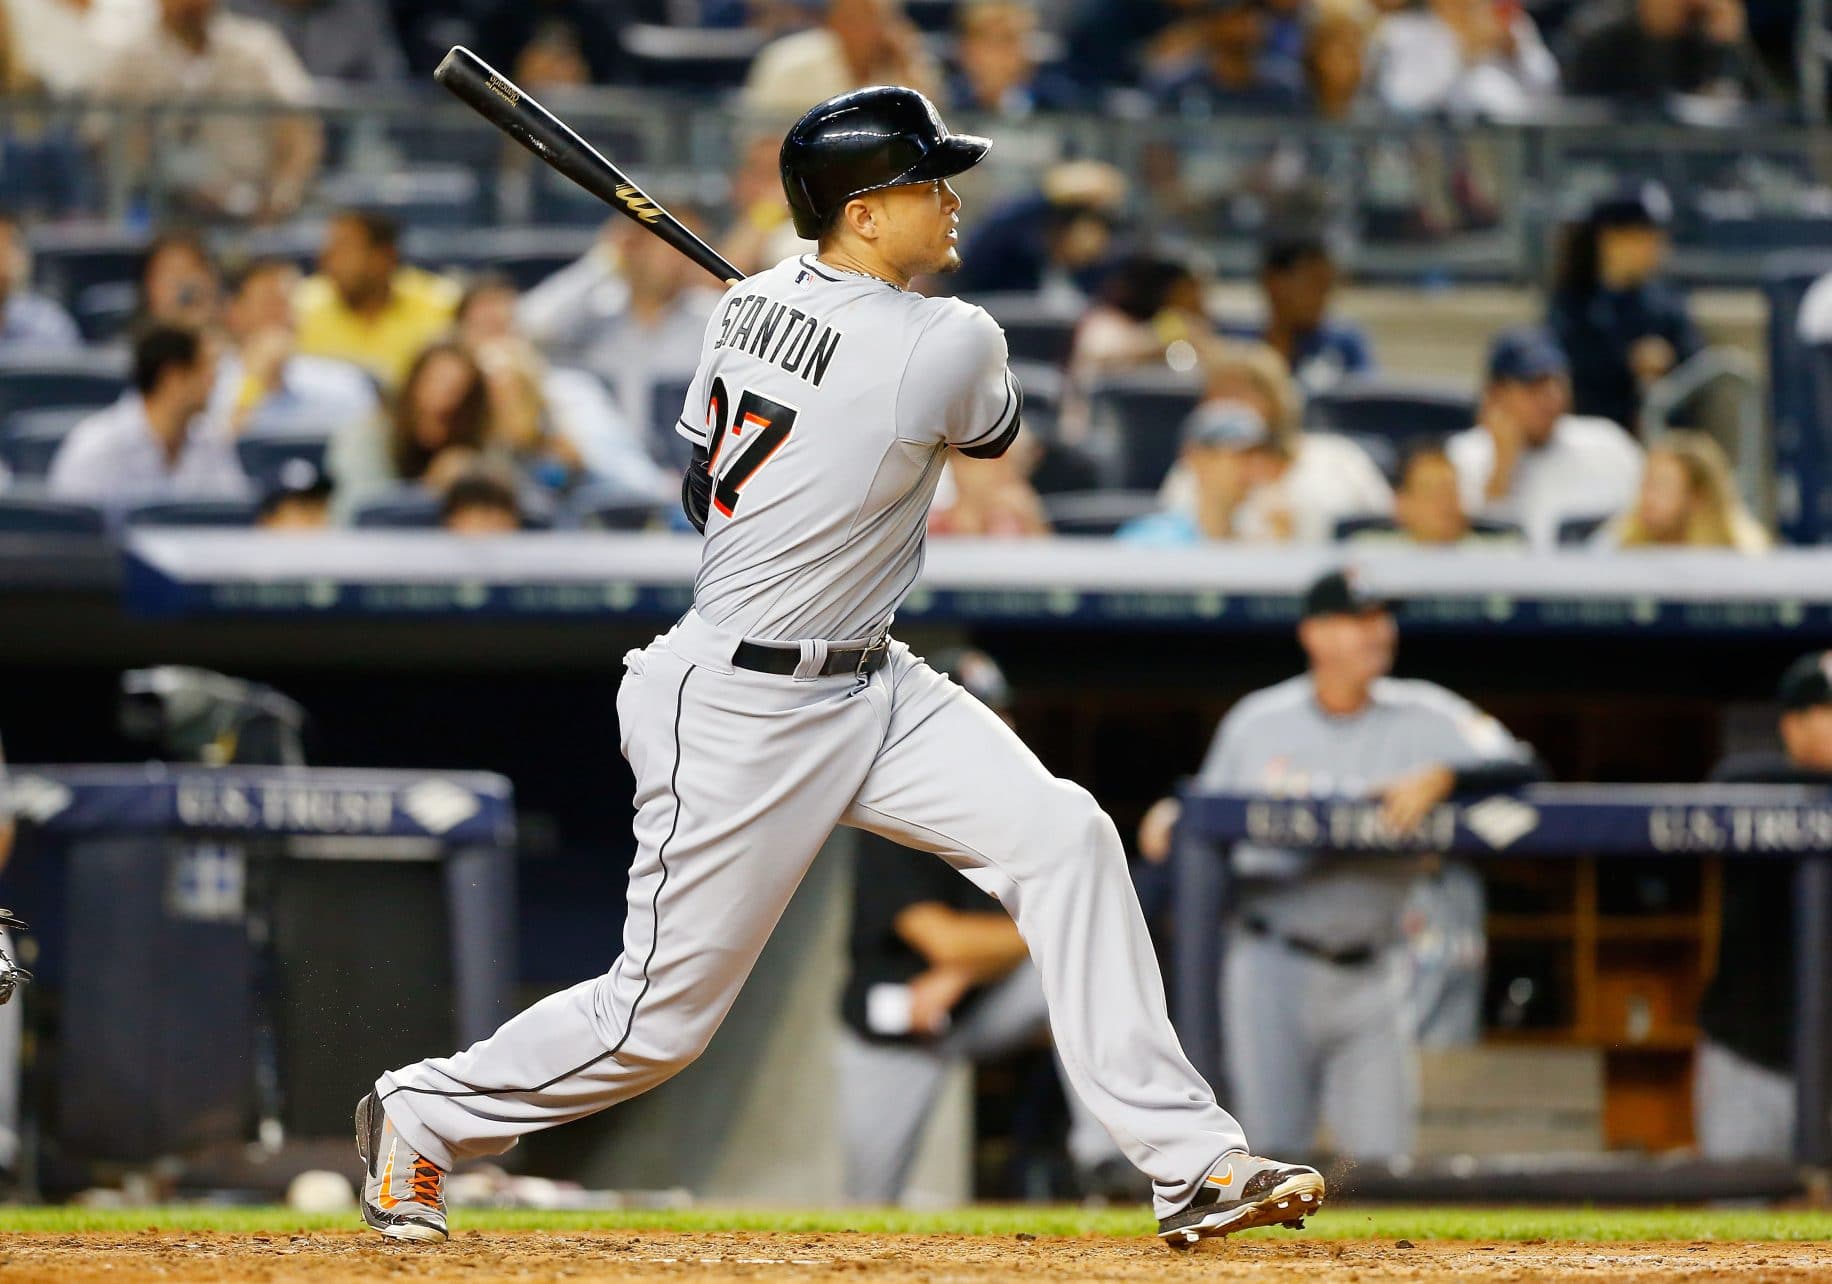 The New York Yankees' Acquisition of Giancarlo Stanton Raises Questions